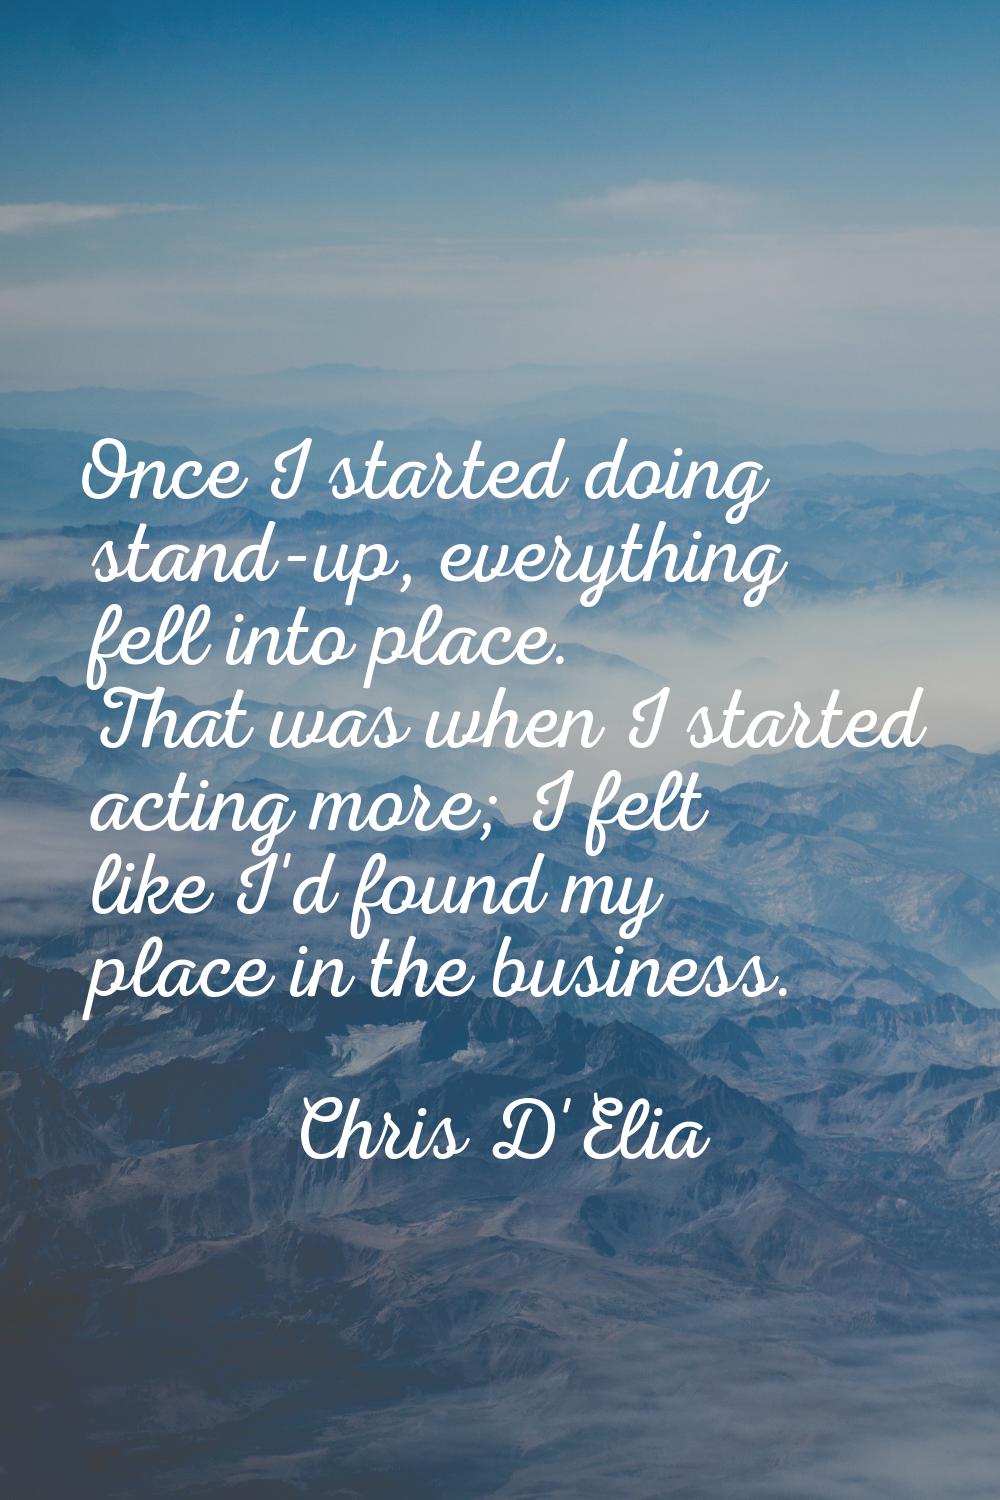 Once I started doing stand-up, everything fell into place. That was when I started acting more; I f